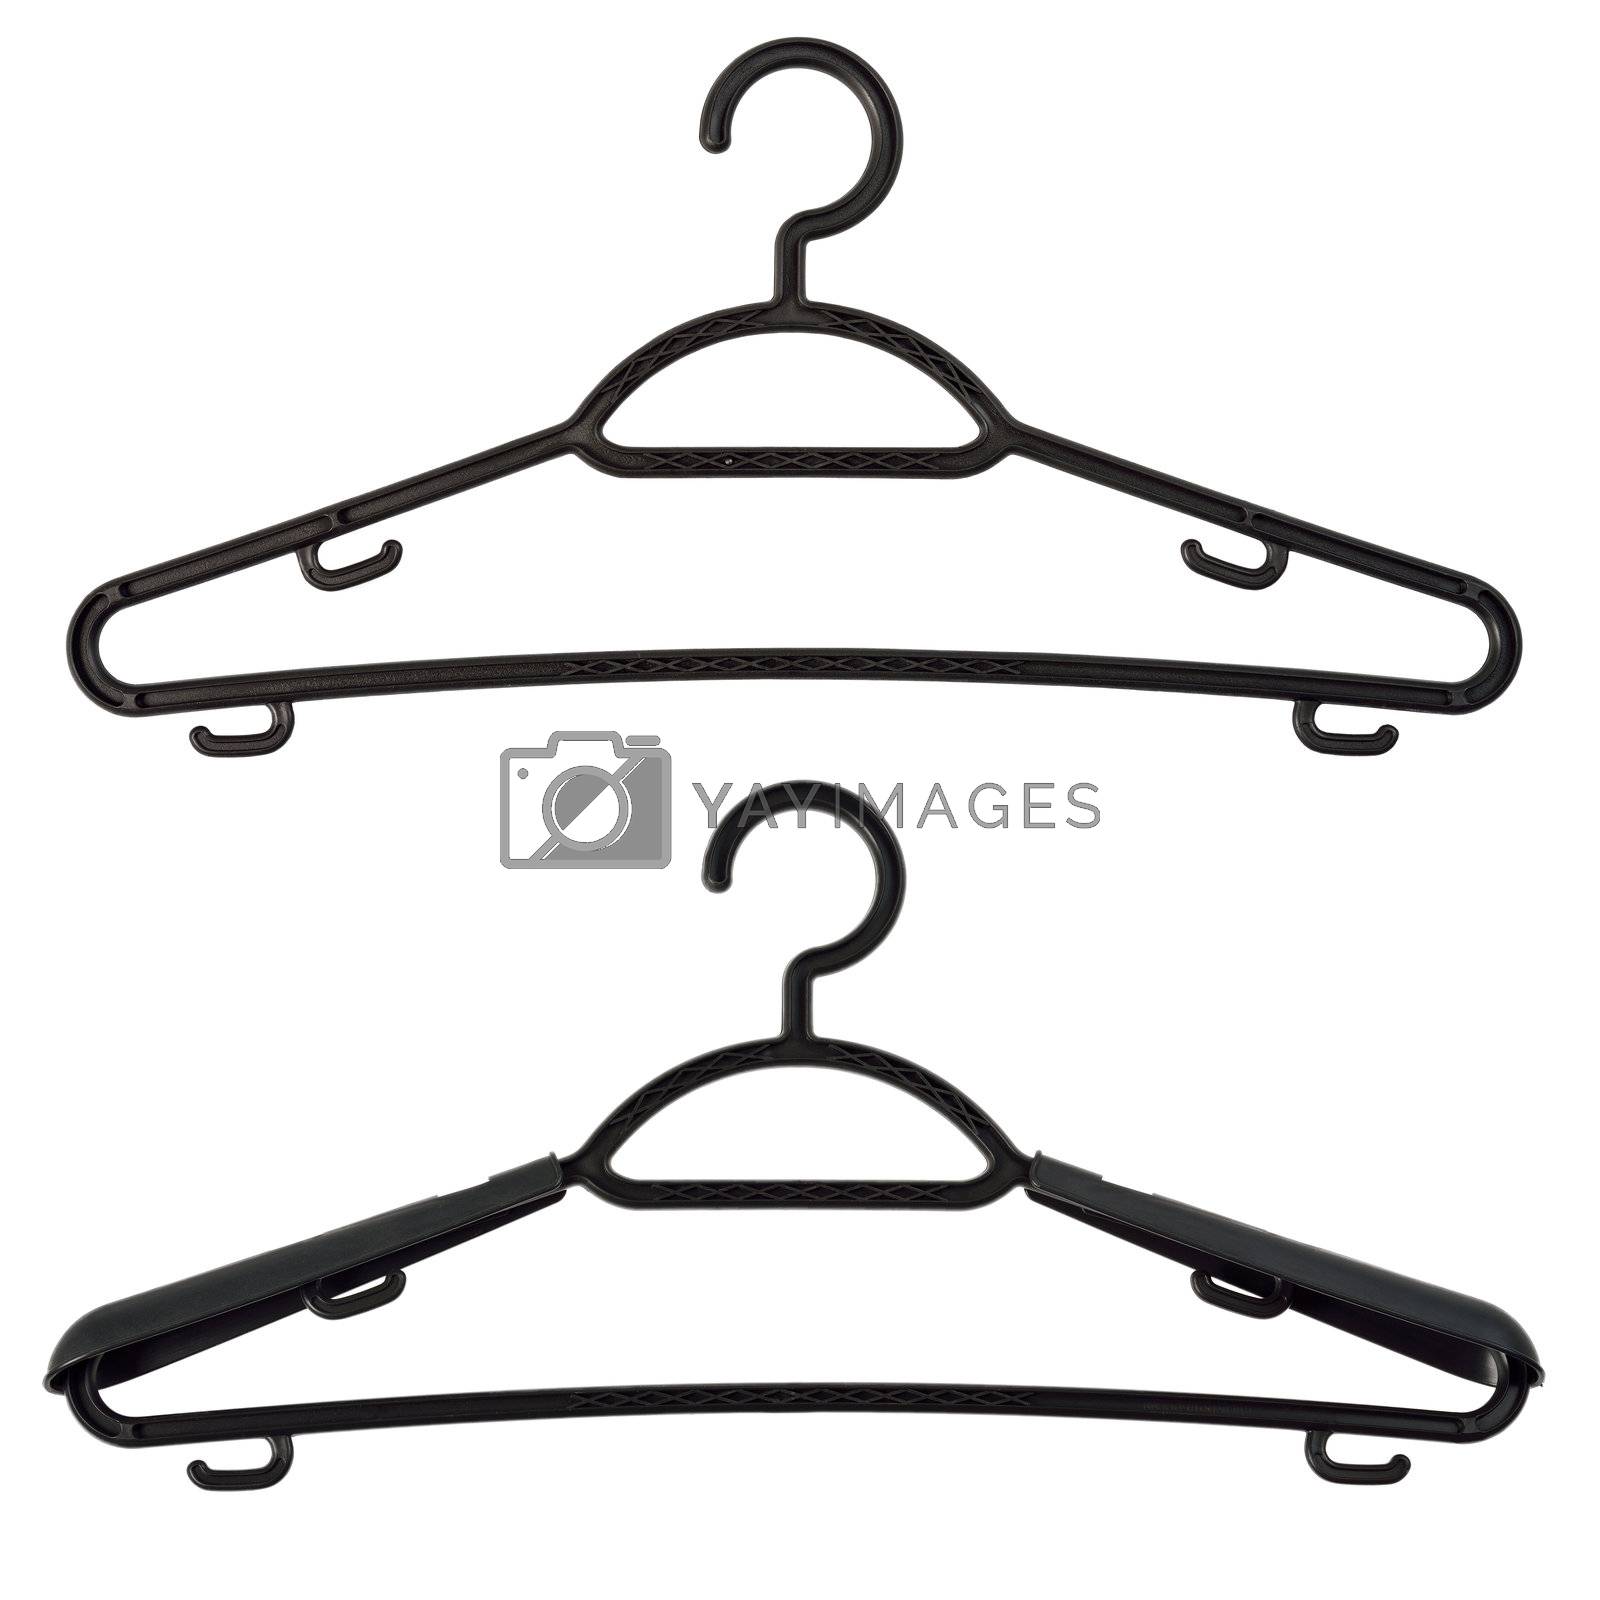 Royalty free image of Clothes hanger by grauvision